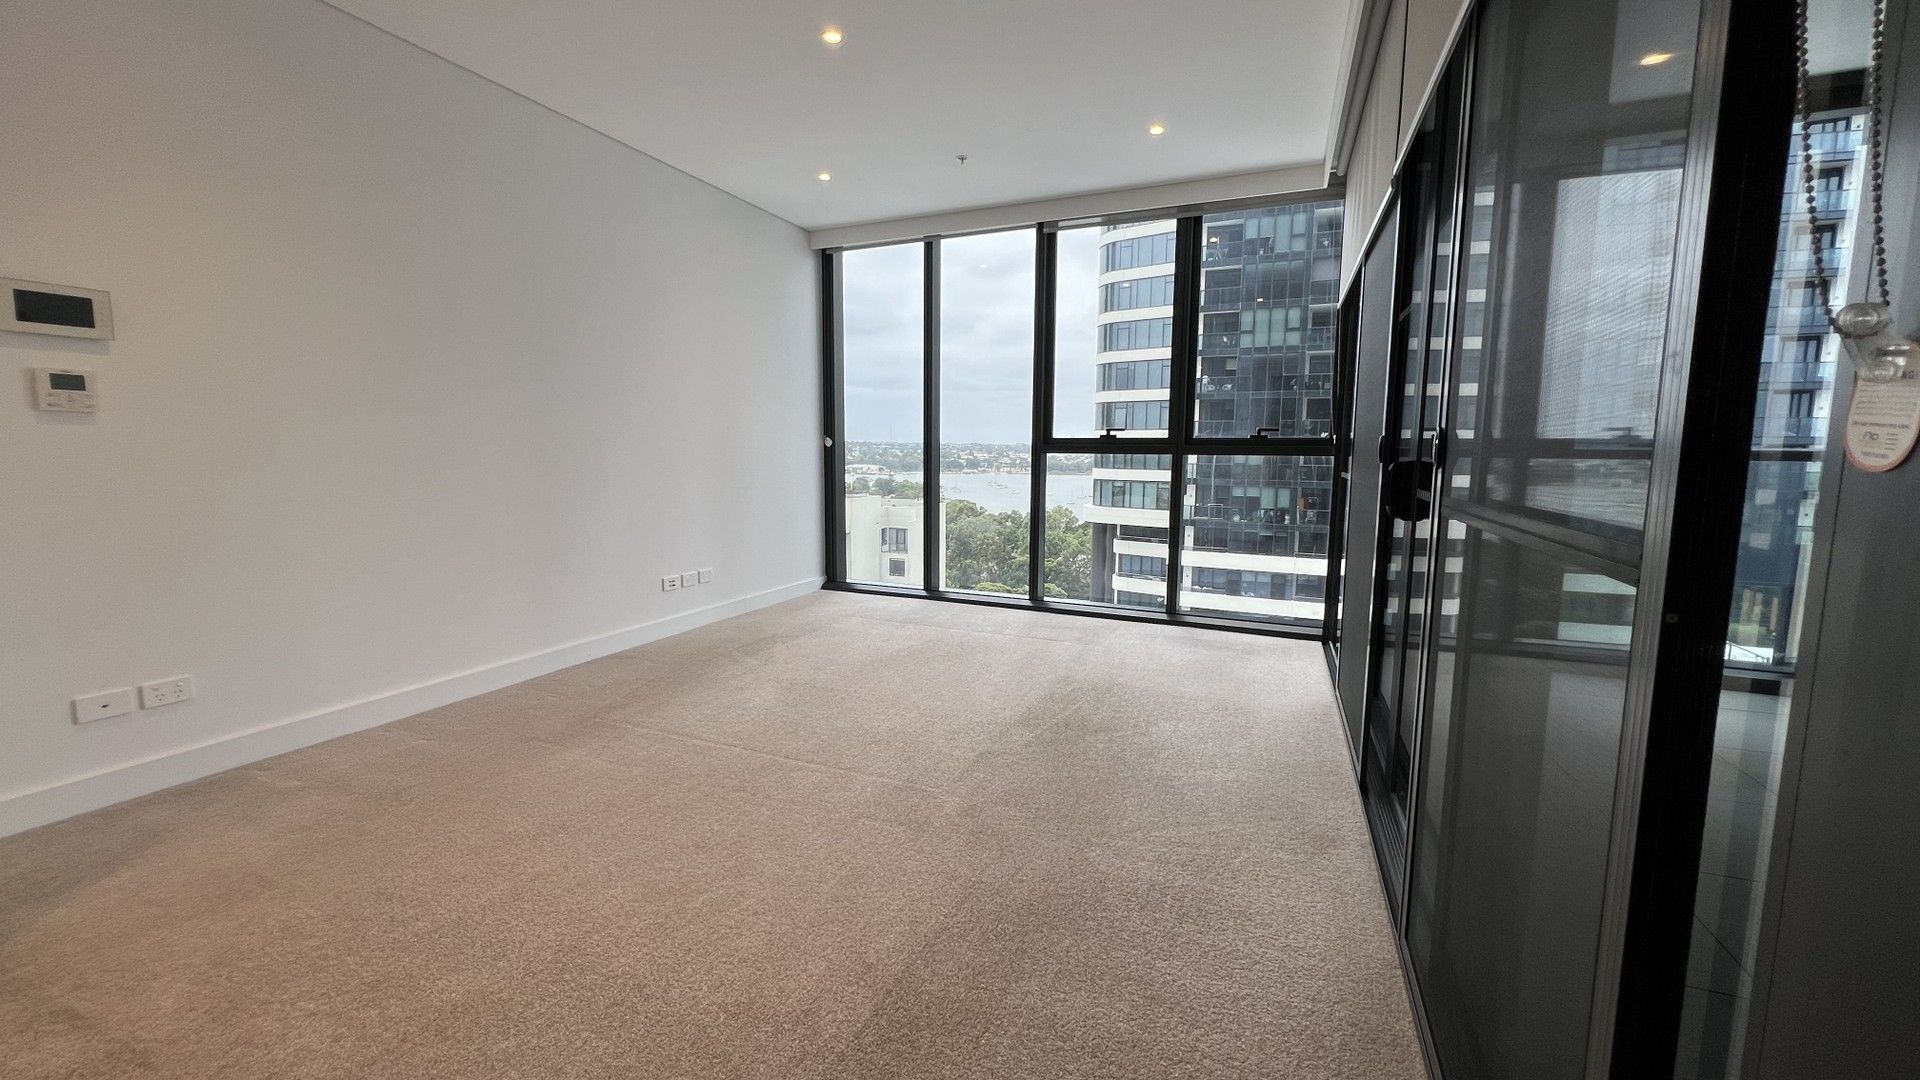 1 bedrooms Apartment / Unit / Flat in 901/21 Marquet street RHODES NSW, 2138